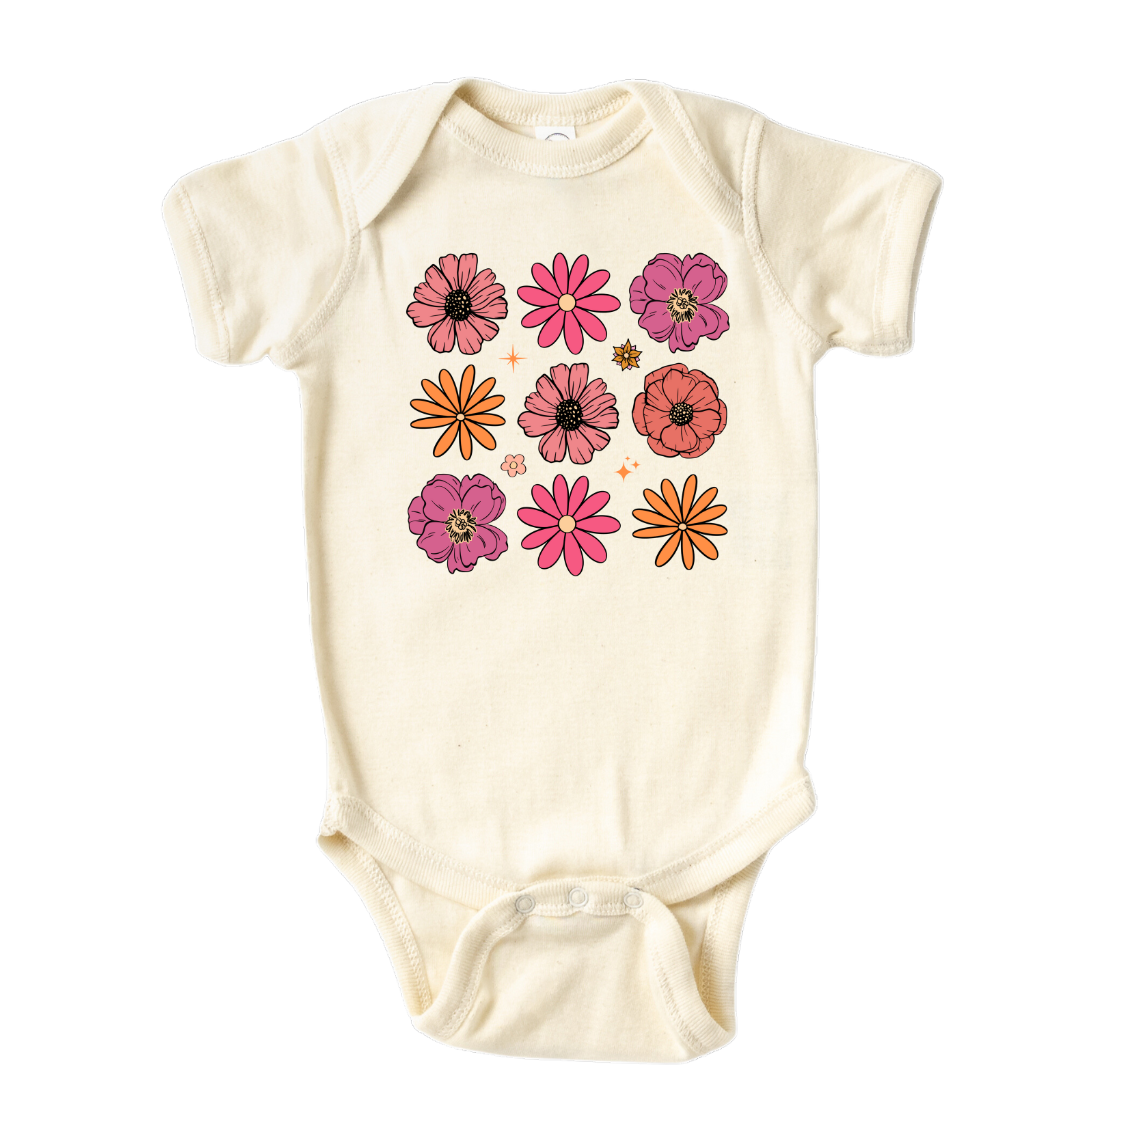 baby girl onesies funny baby onesies baby announcement onesie personalized baby girl gifts custom baby onesie infant clothes cute baby girl clothes funny baby clothes newborn onesies unisex newborn boy onesies funny onesies for babies